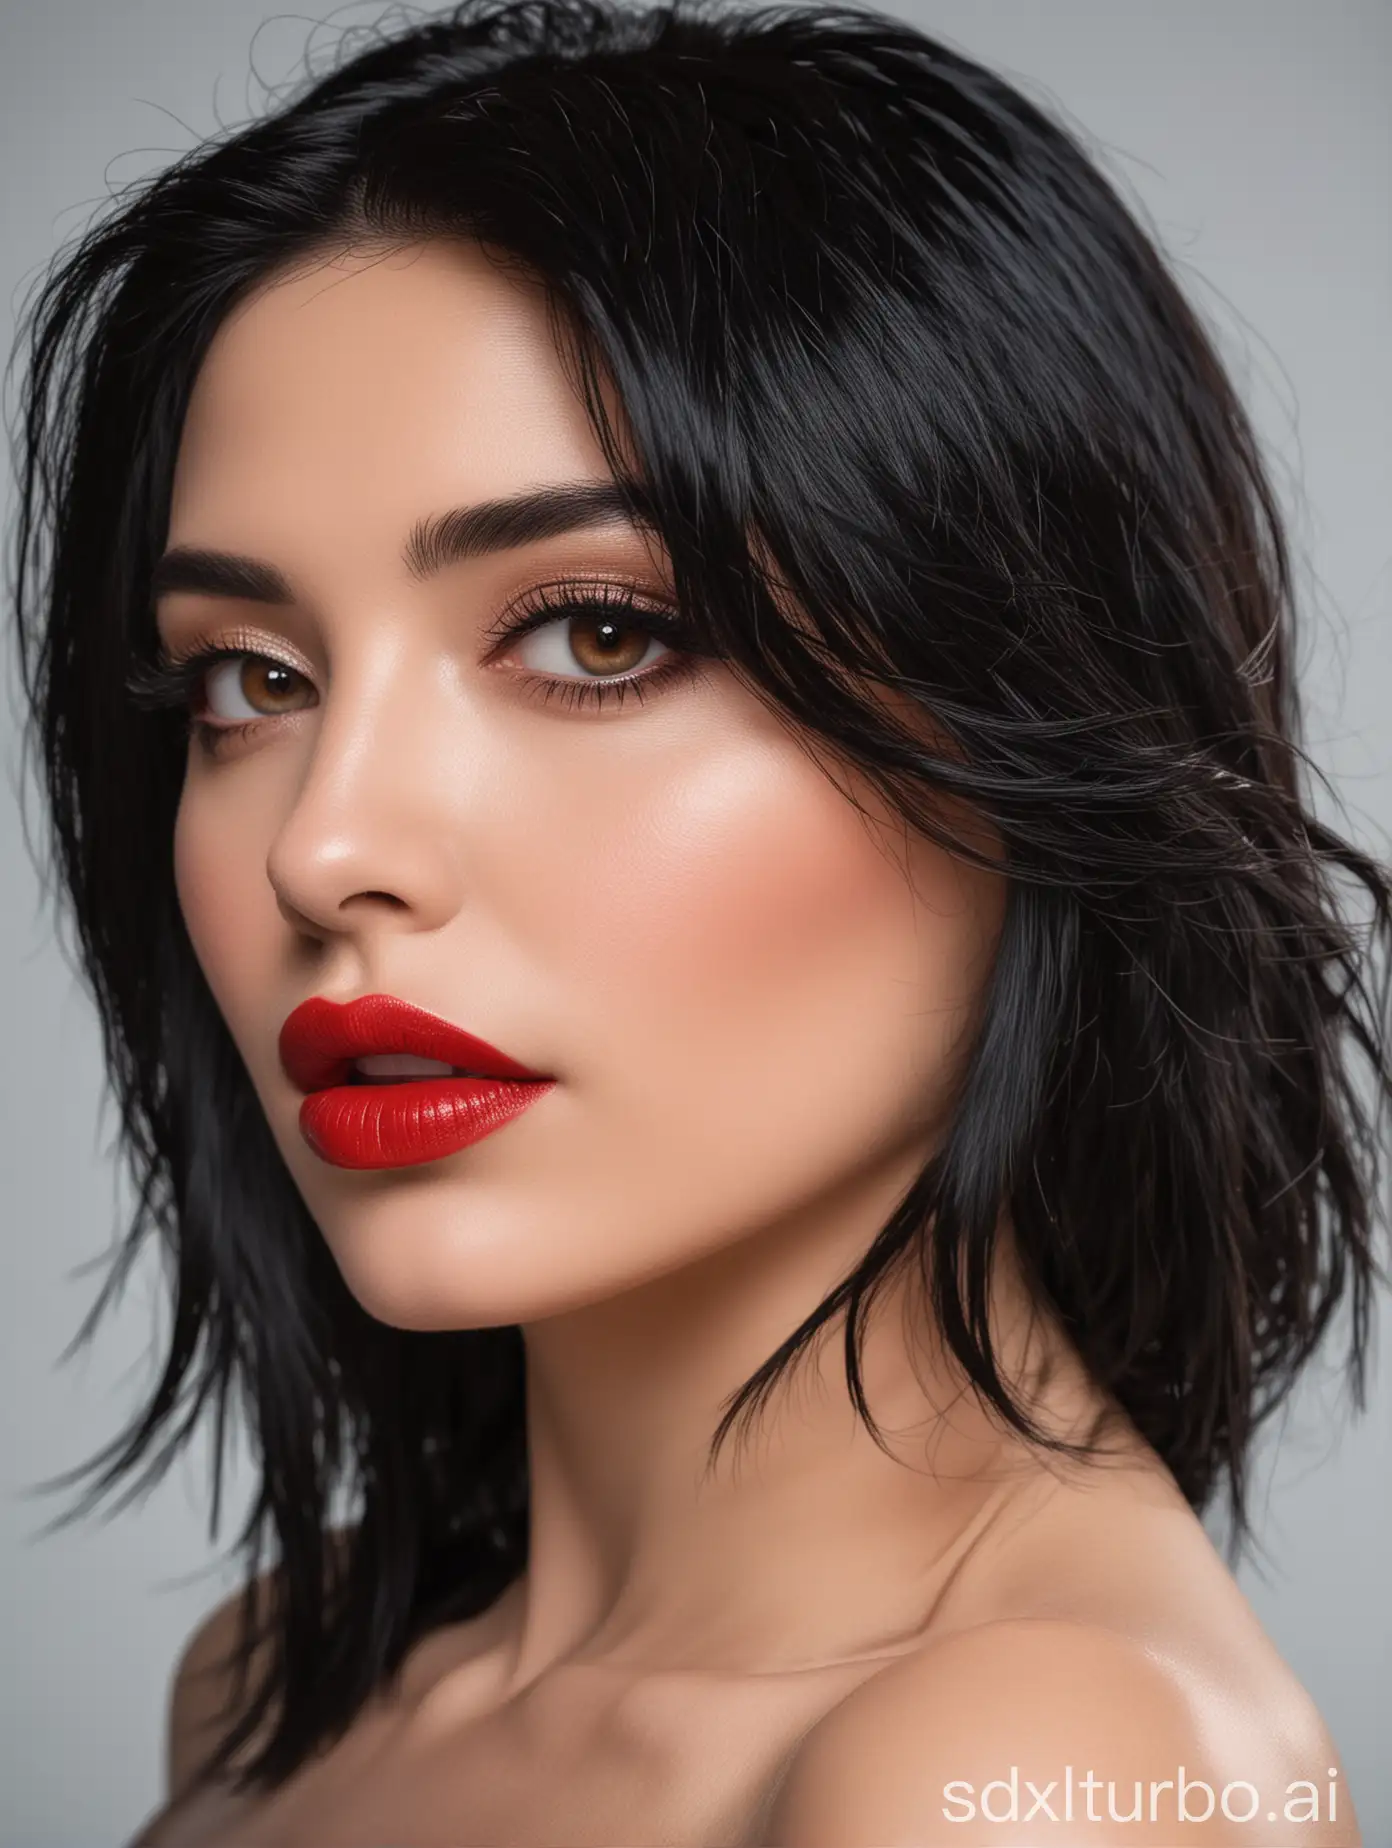 Captivating-Woman-with-Black-Hair-Red-Lips-and-Intense-Gaze